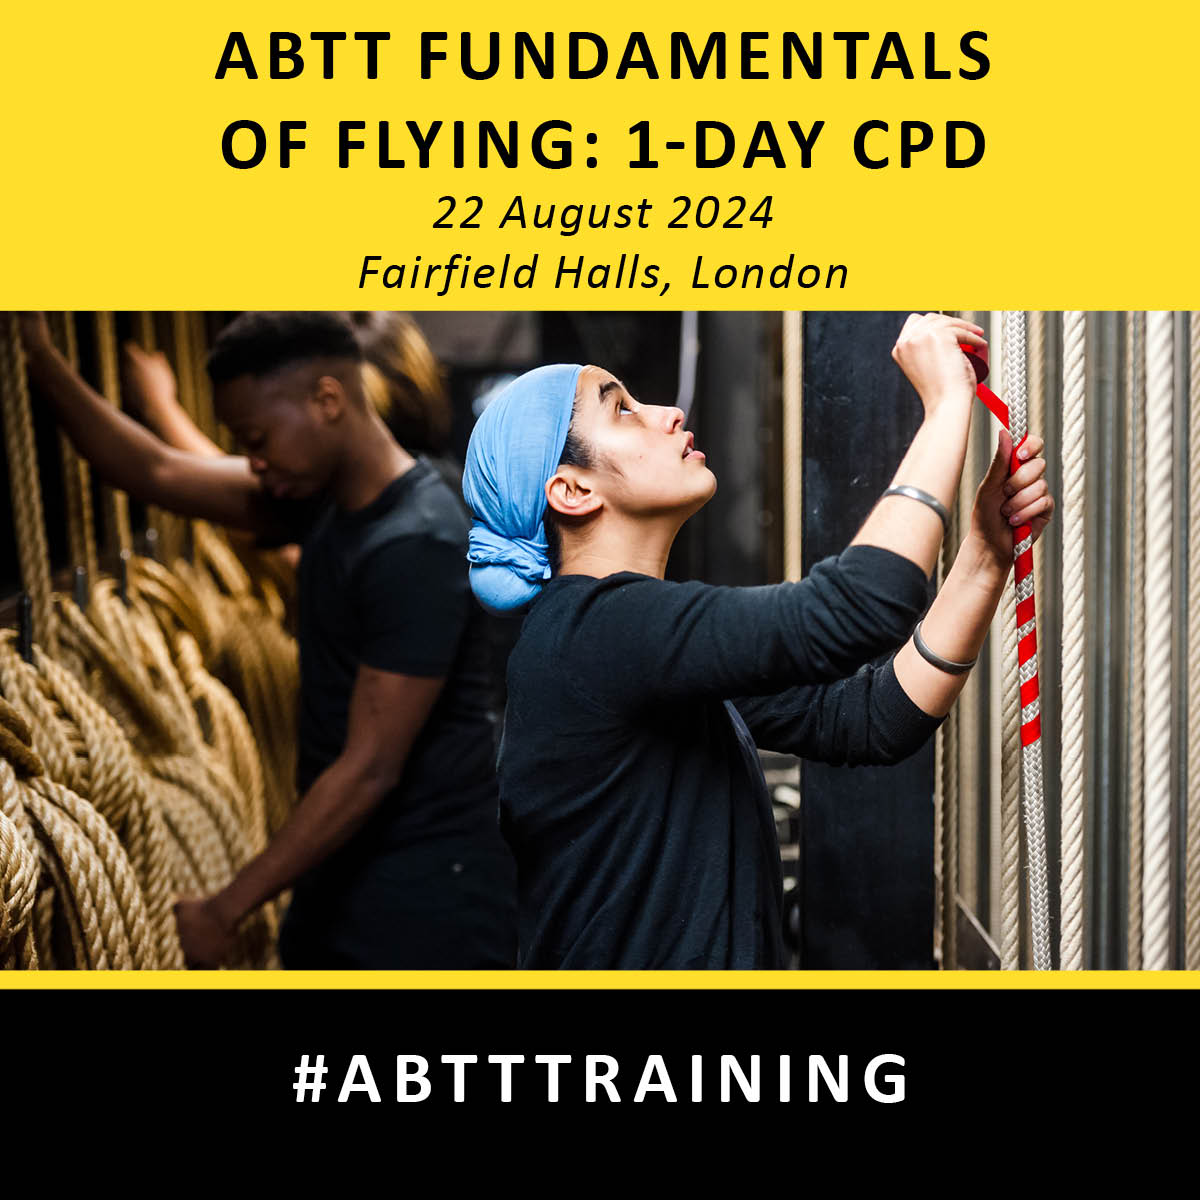 NOW BOOKING- One-day CPD Course: ABTT Fundamentals of Flying - London - 22 August 2024. The course covers the safe handling of counterweight sets & hemp, knots in practice, & many other methods of hanging. Book here now: abtt.org.uk/events/one-day… #ABTTTraining